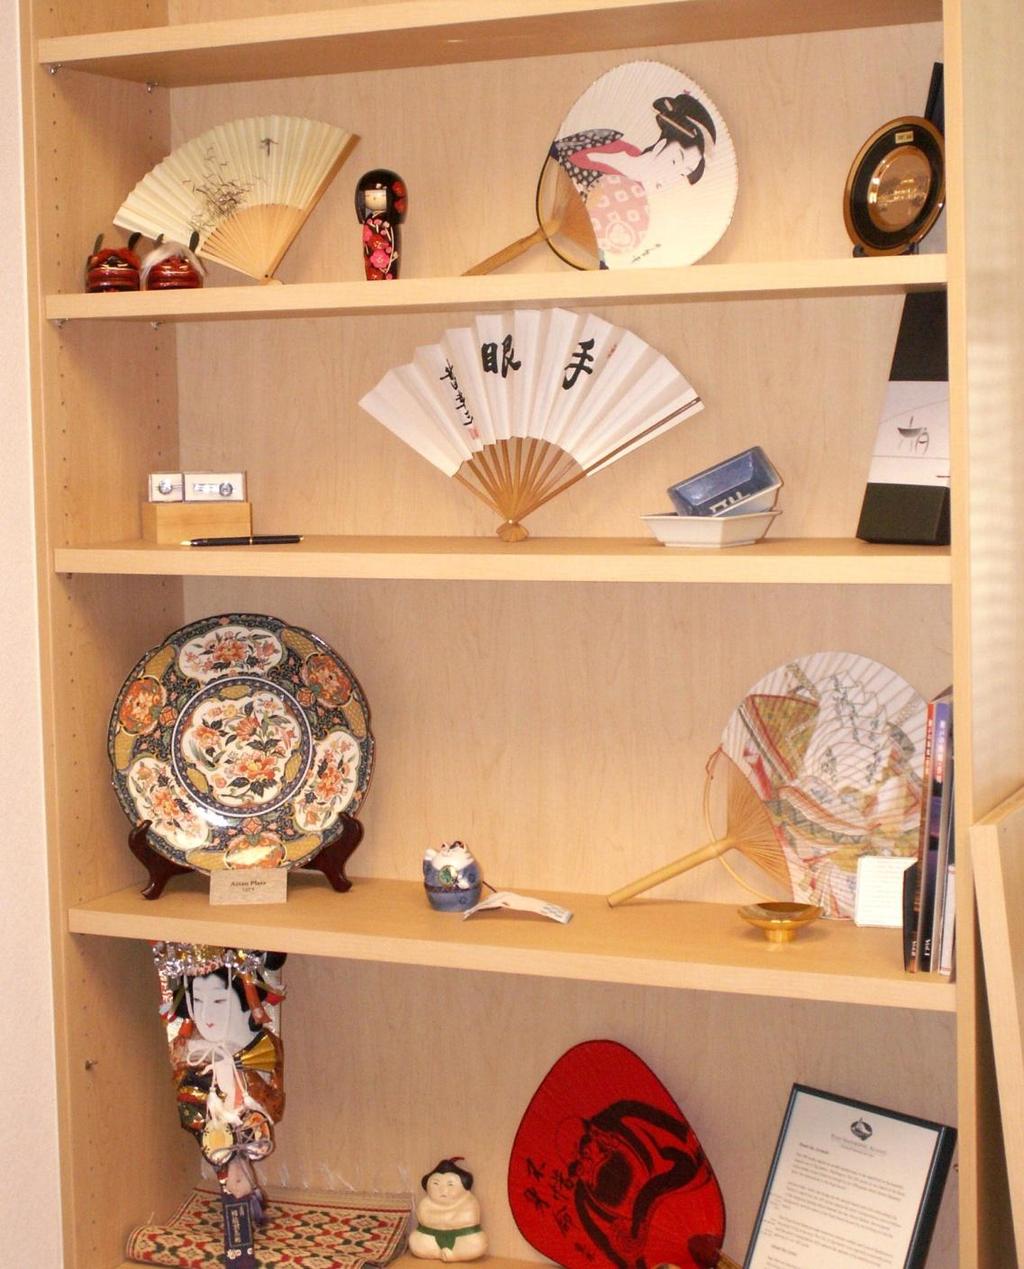 MISC. ASIAN FANS, DOLLS, ETC. Gifts from Japan Sister City Program YEAR:?